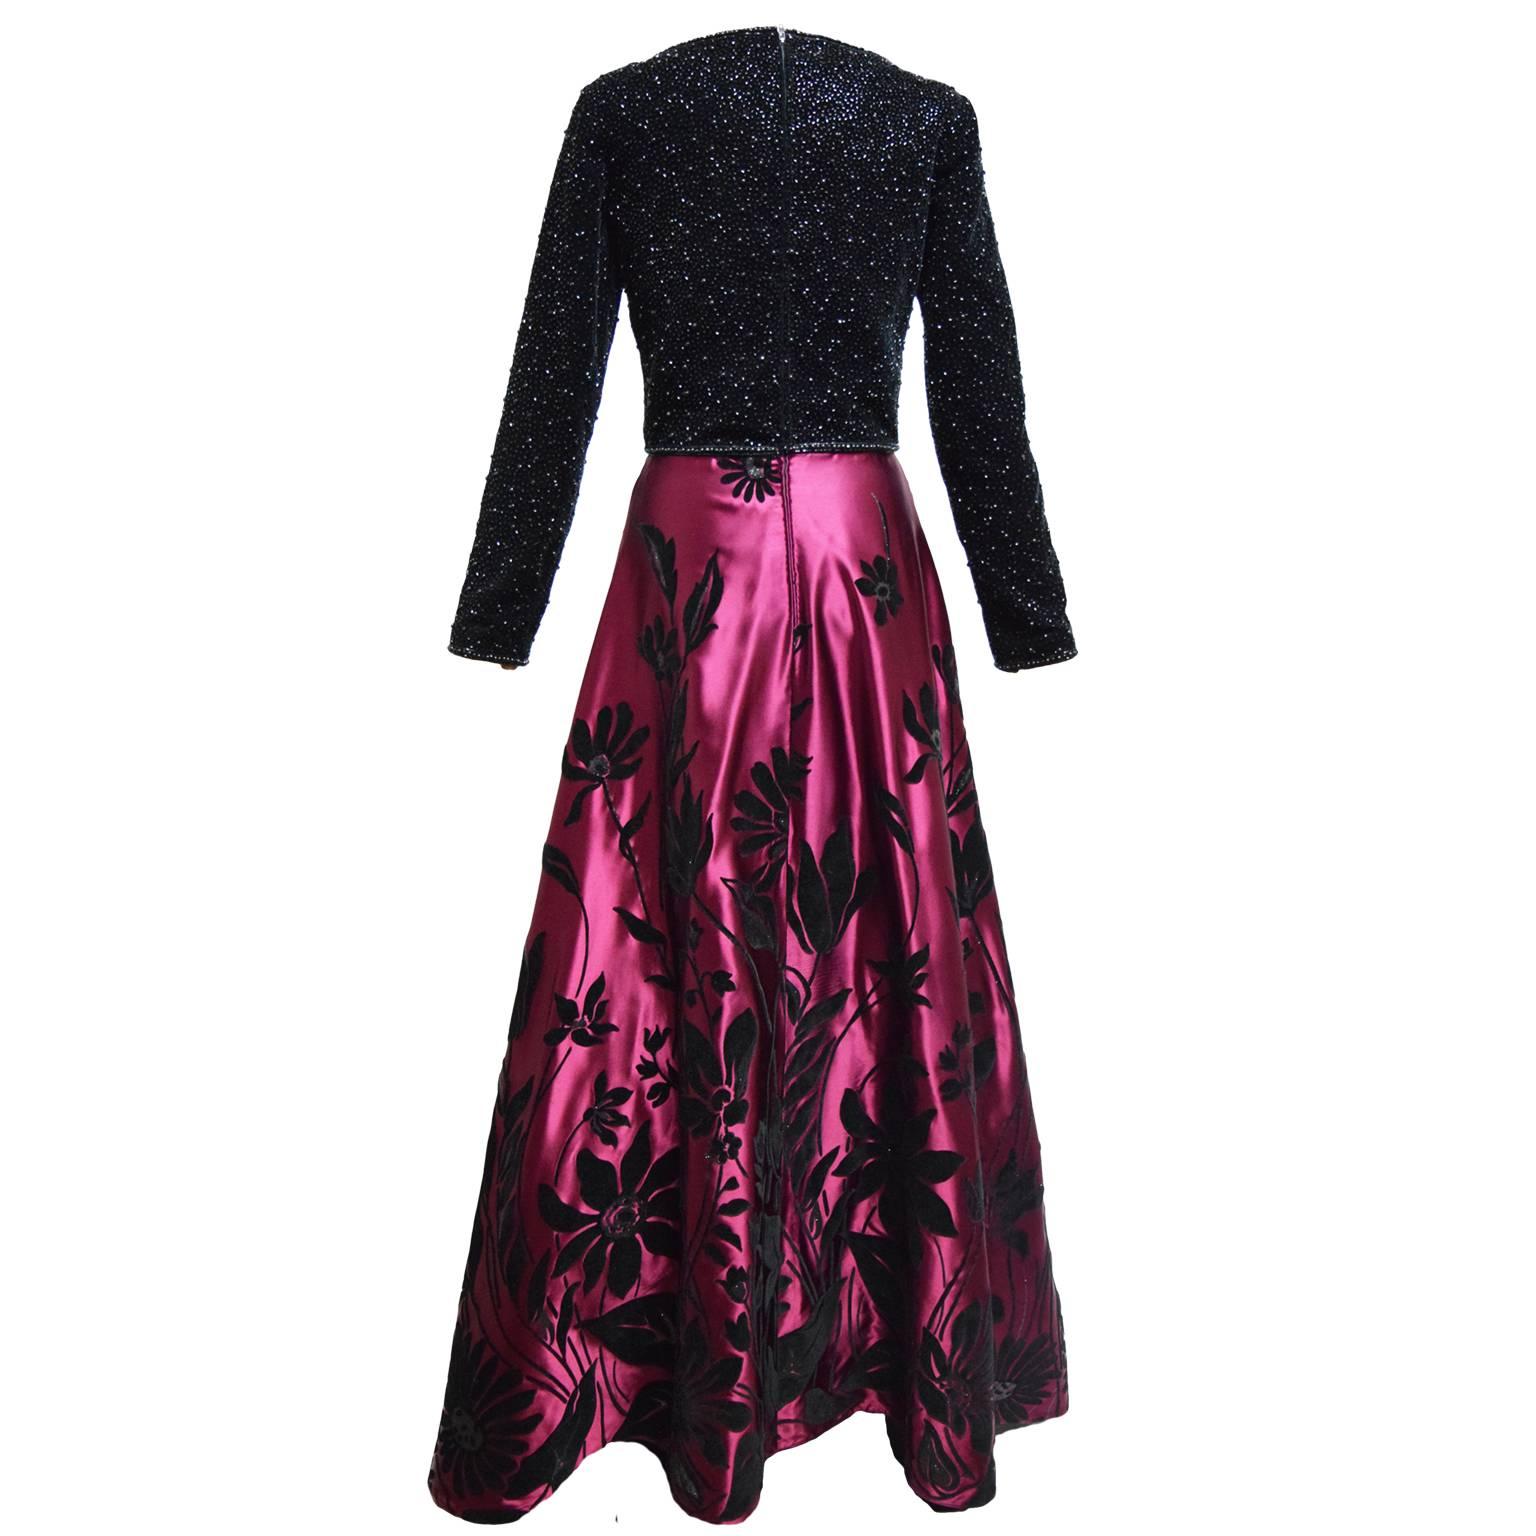 This beautiful evening gown by Victoria Royal is a one of a kind. The bodice is made of rich black velvet and has black crystal iridescent jewel embellishments.  The bodice has a slight sweetheart neckline. The skirt of the gown is a vibrant merlot